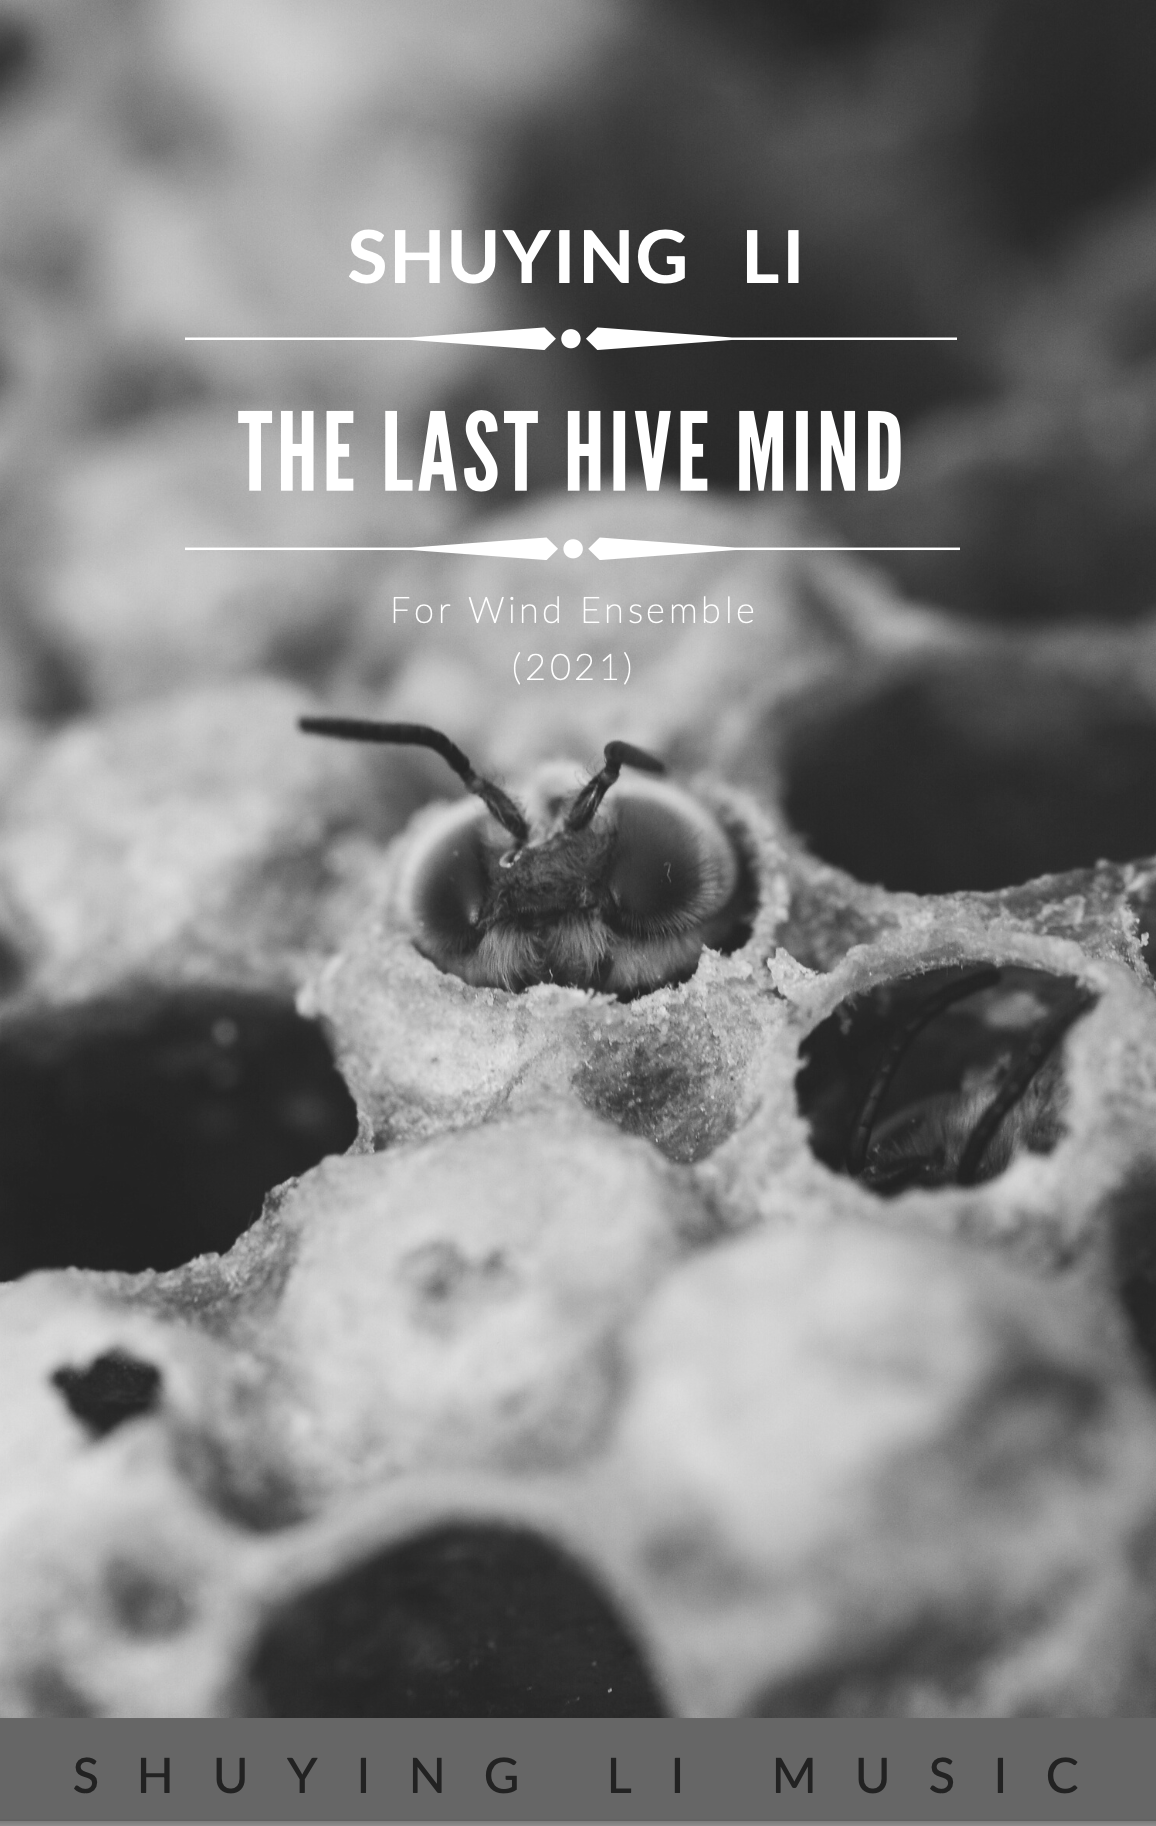 The Last Hivemind (2021, Grade 4 Version Score Only) by Shuying Li